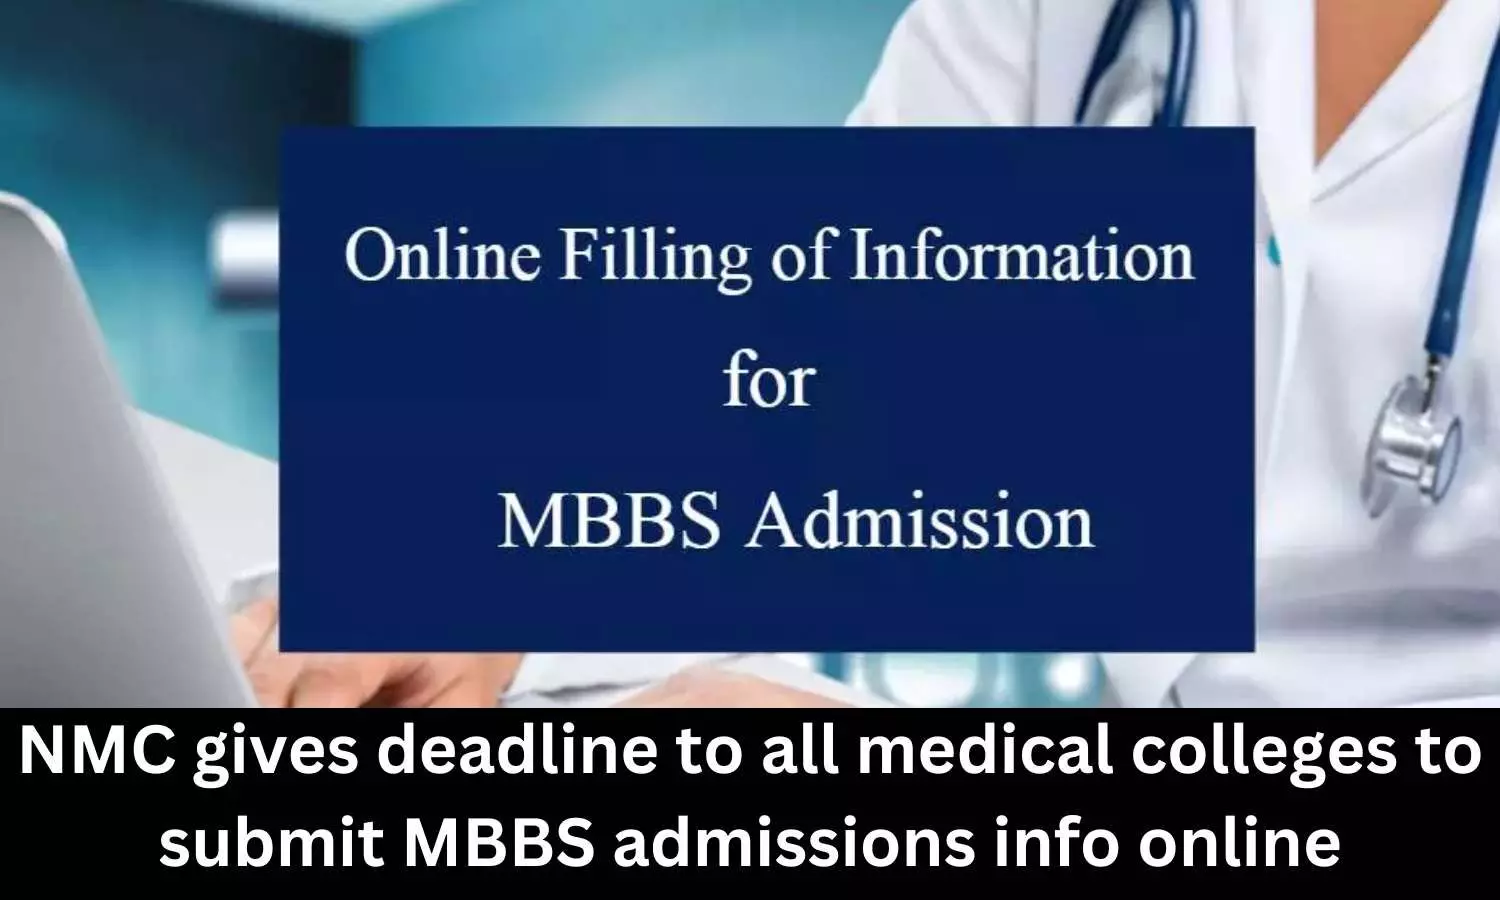 NMC gives deadline to all medical colleges to submit MBBS admissions info online